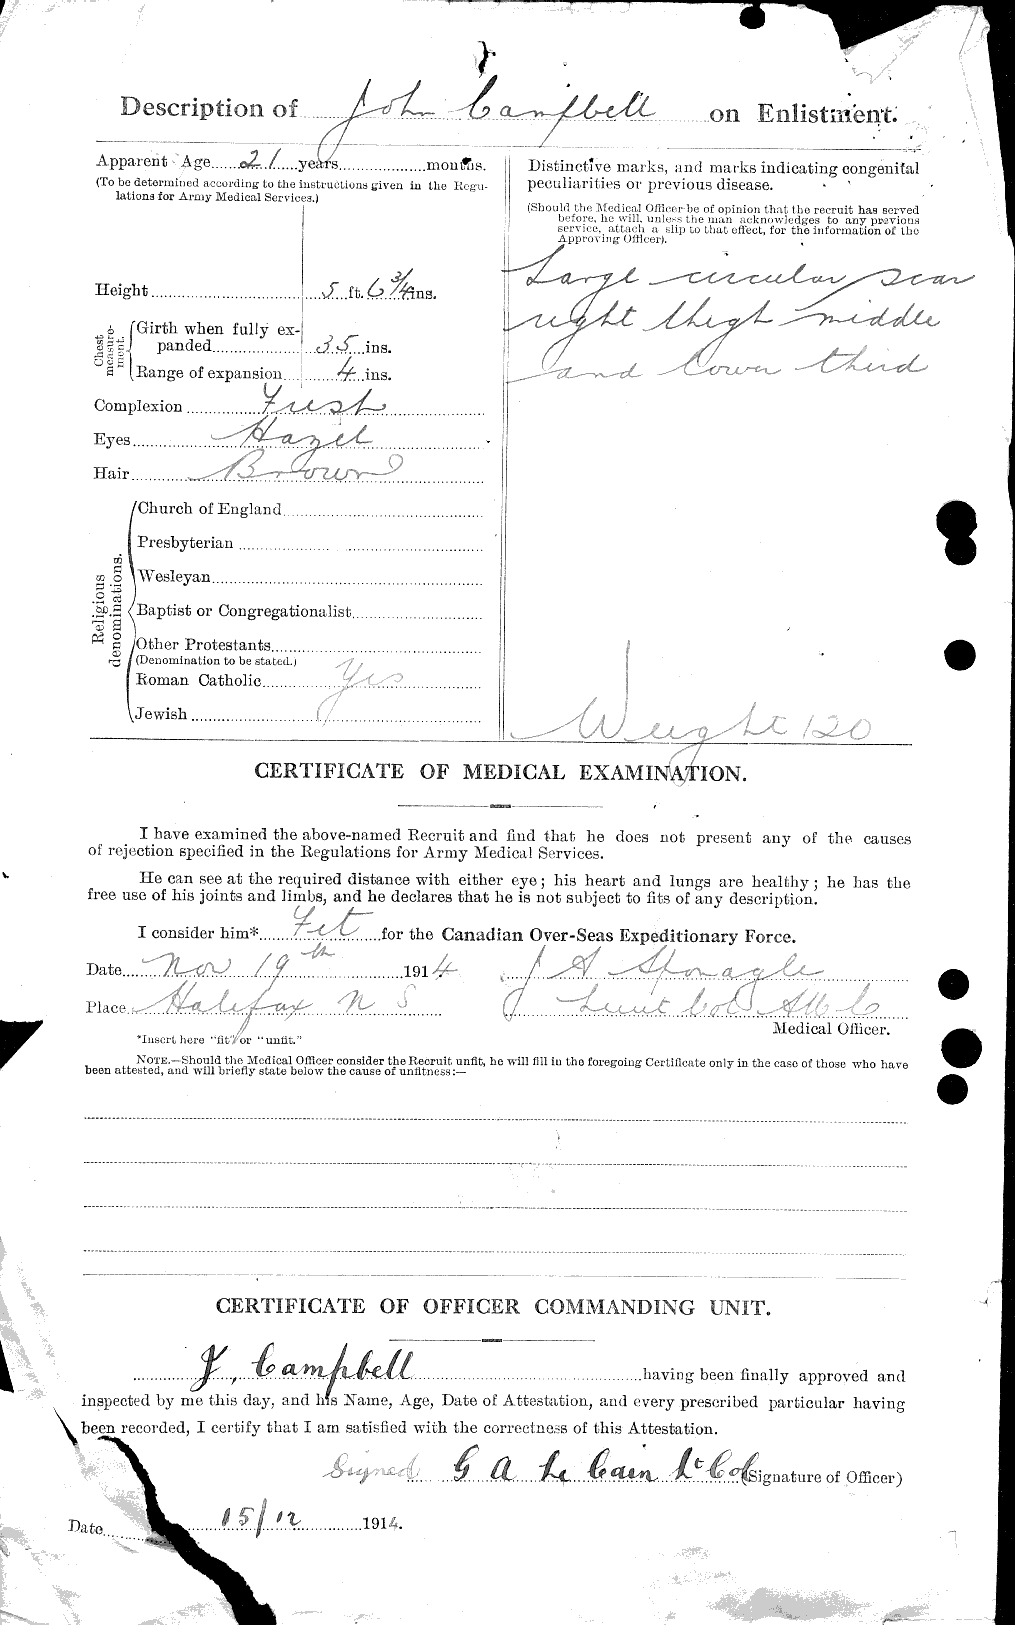 Personnel Records of the First World War - CEF 006805b